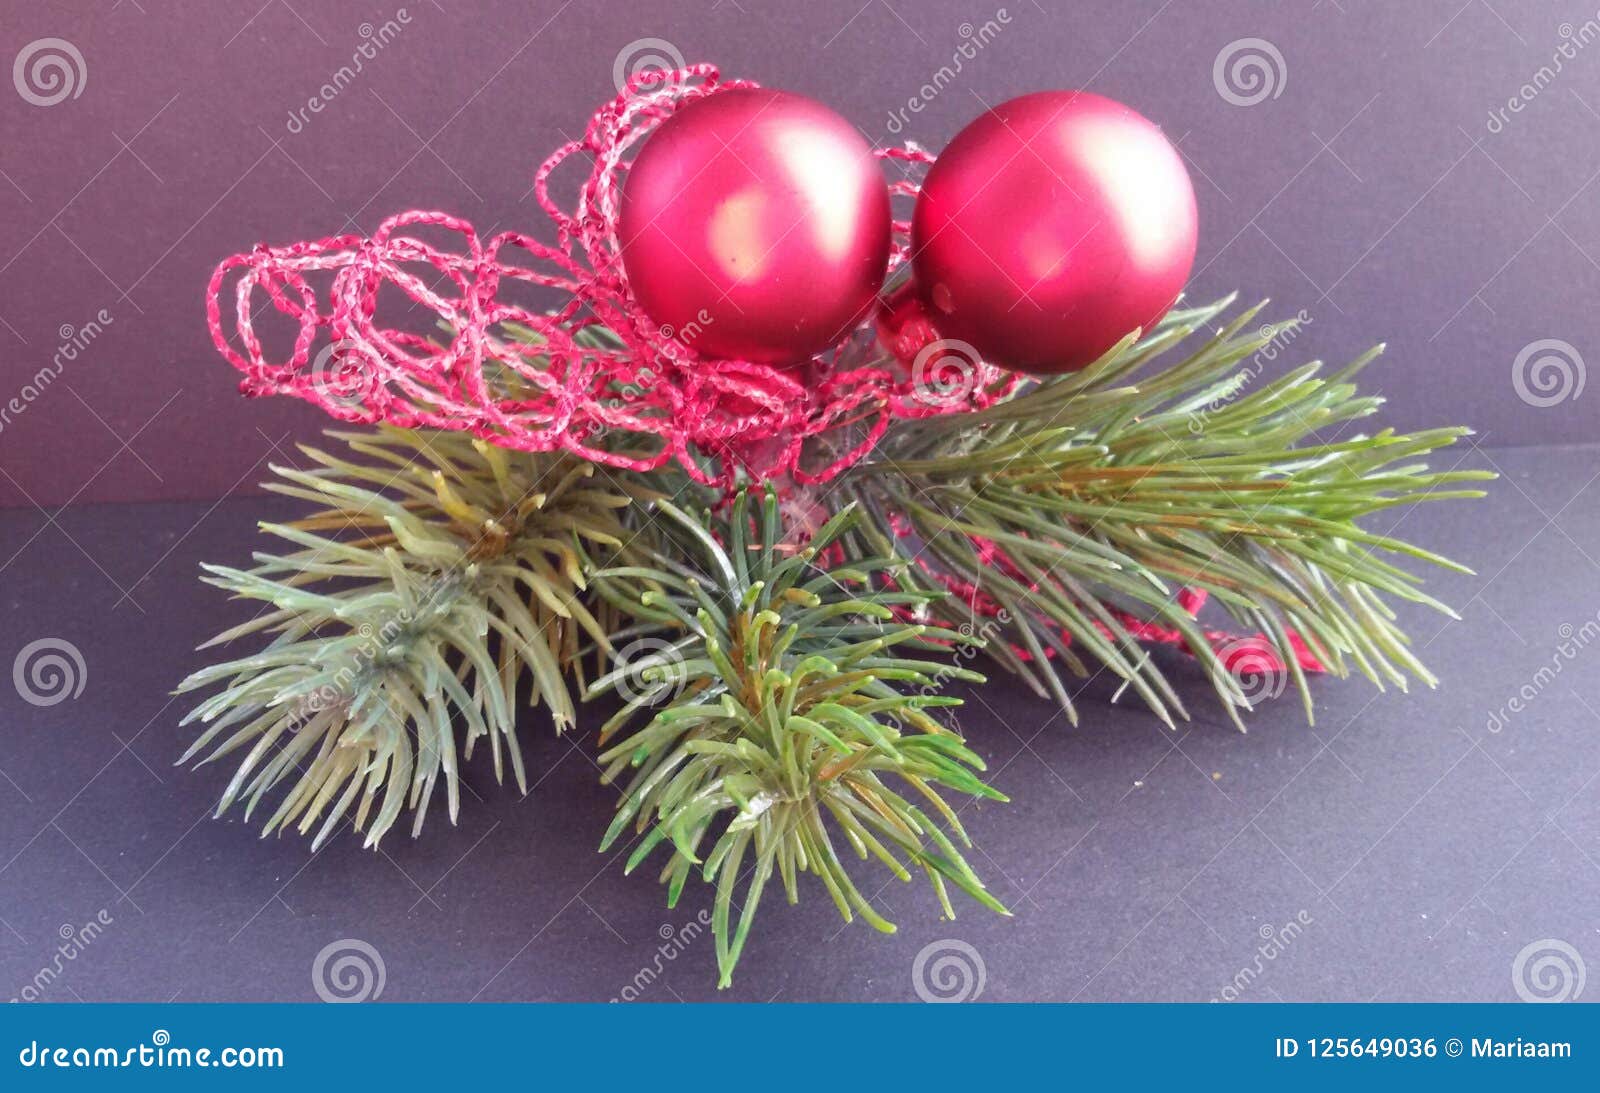 Christmas Decoration with Different Ornaments. Beautiful Festive Decor